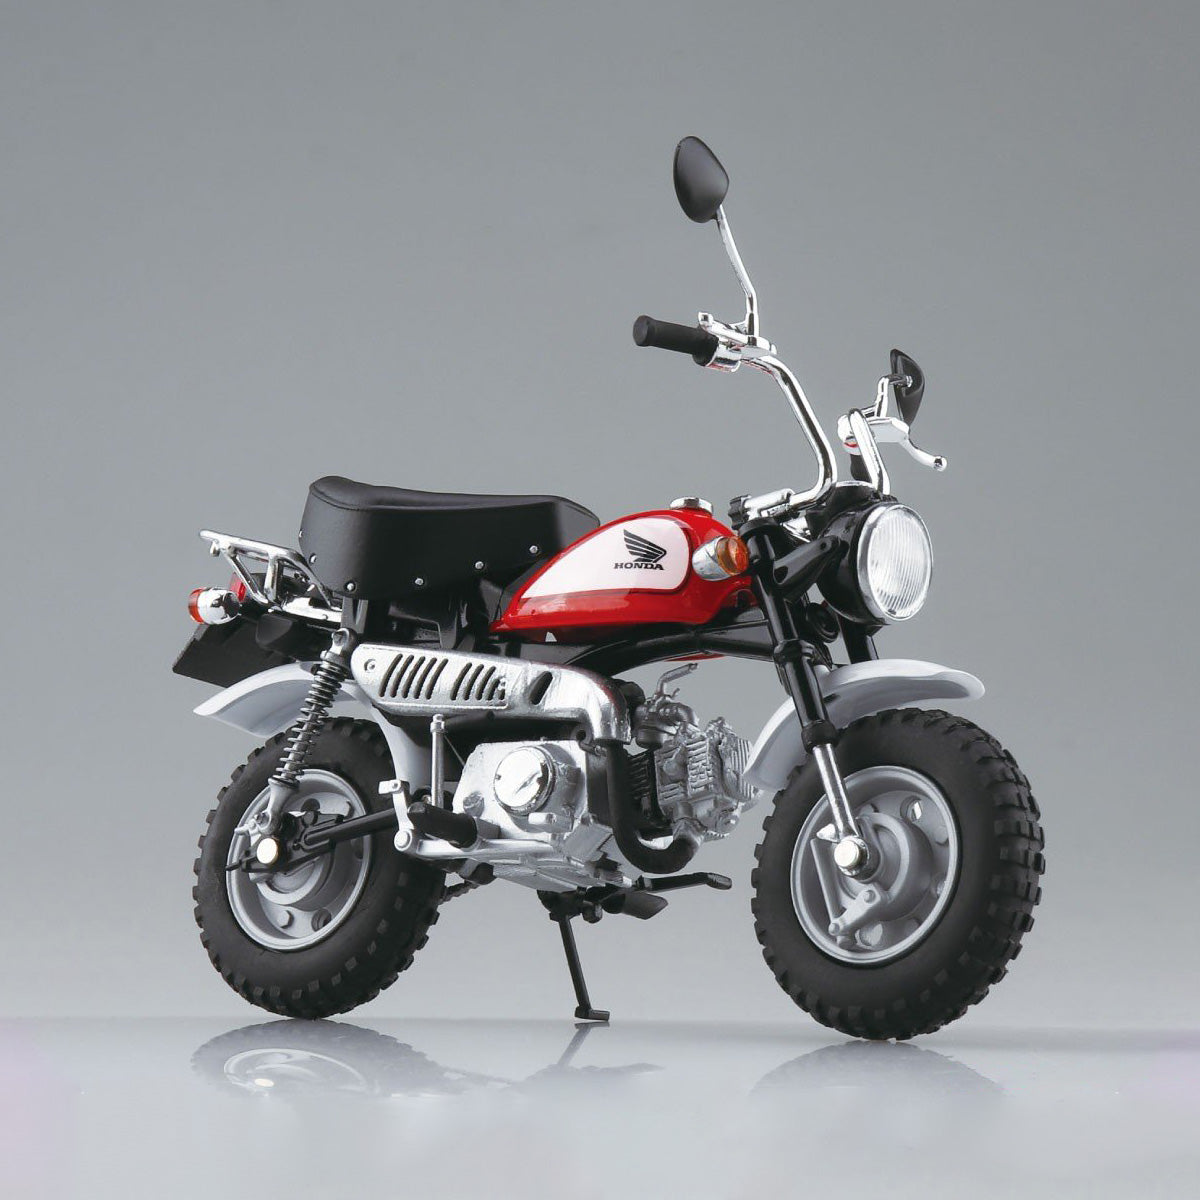 Aoshima - Diecast Motorcycle - Honda Monkey (Fighting Red) (1/12 Scale) - Marvelous Toys